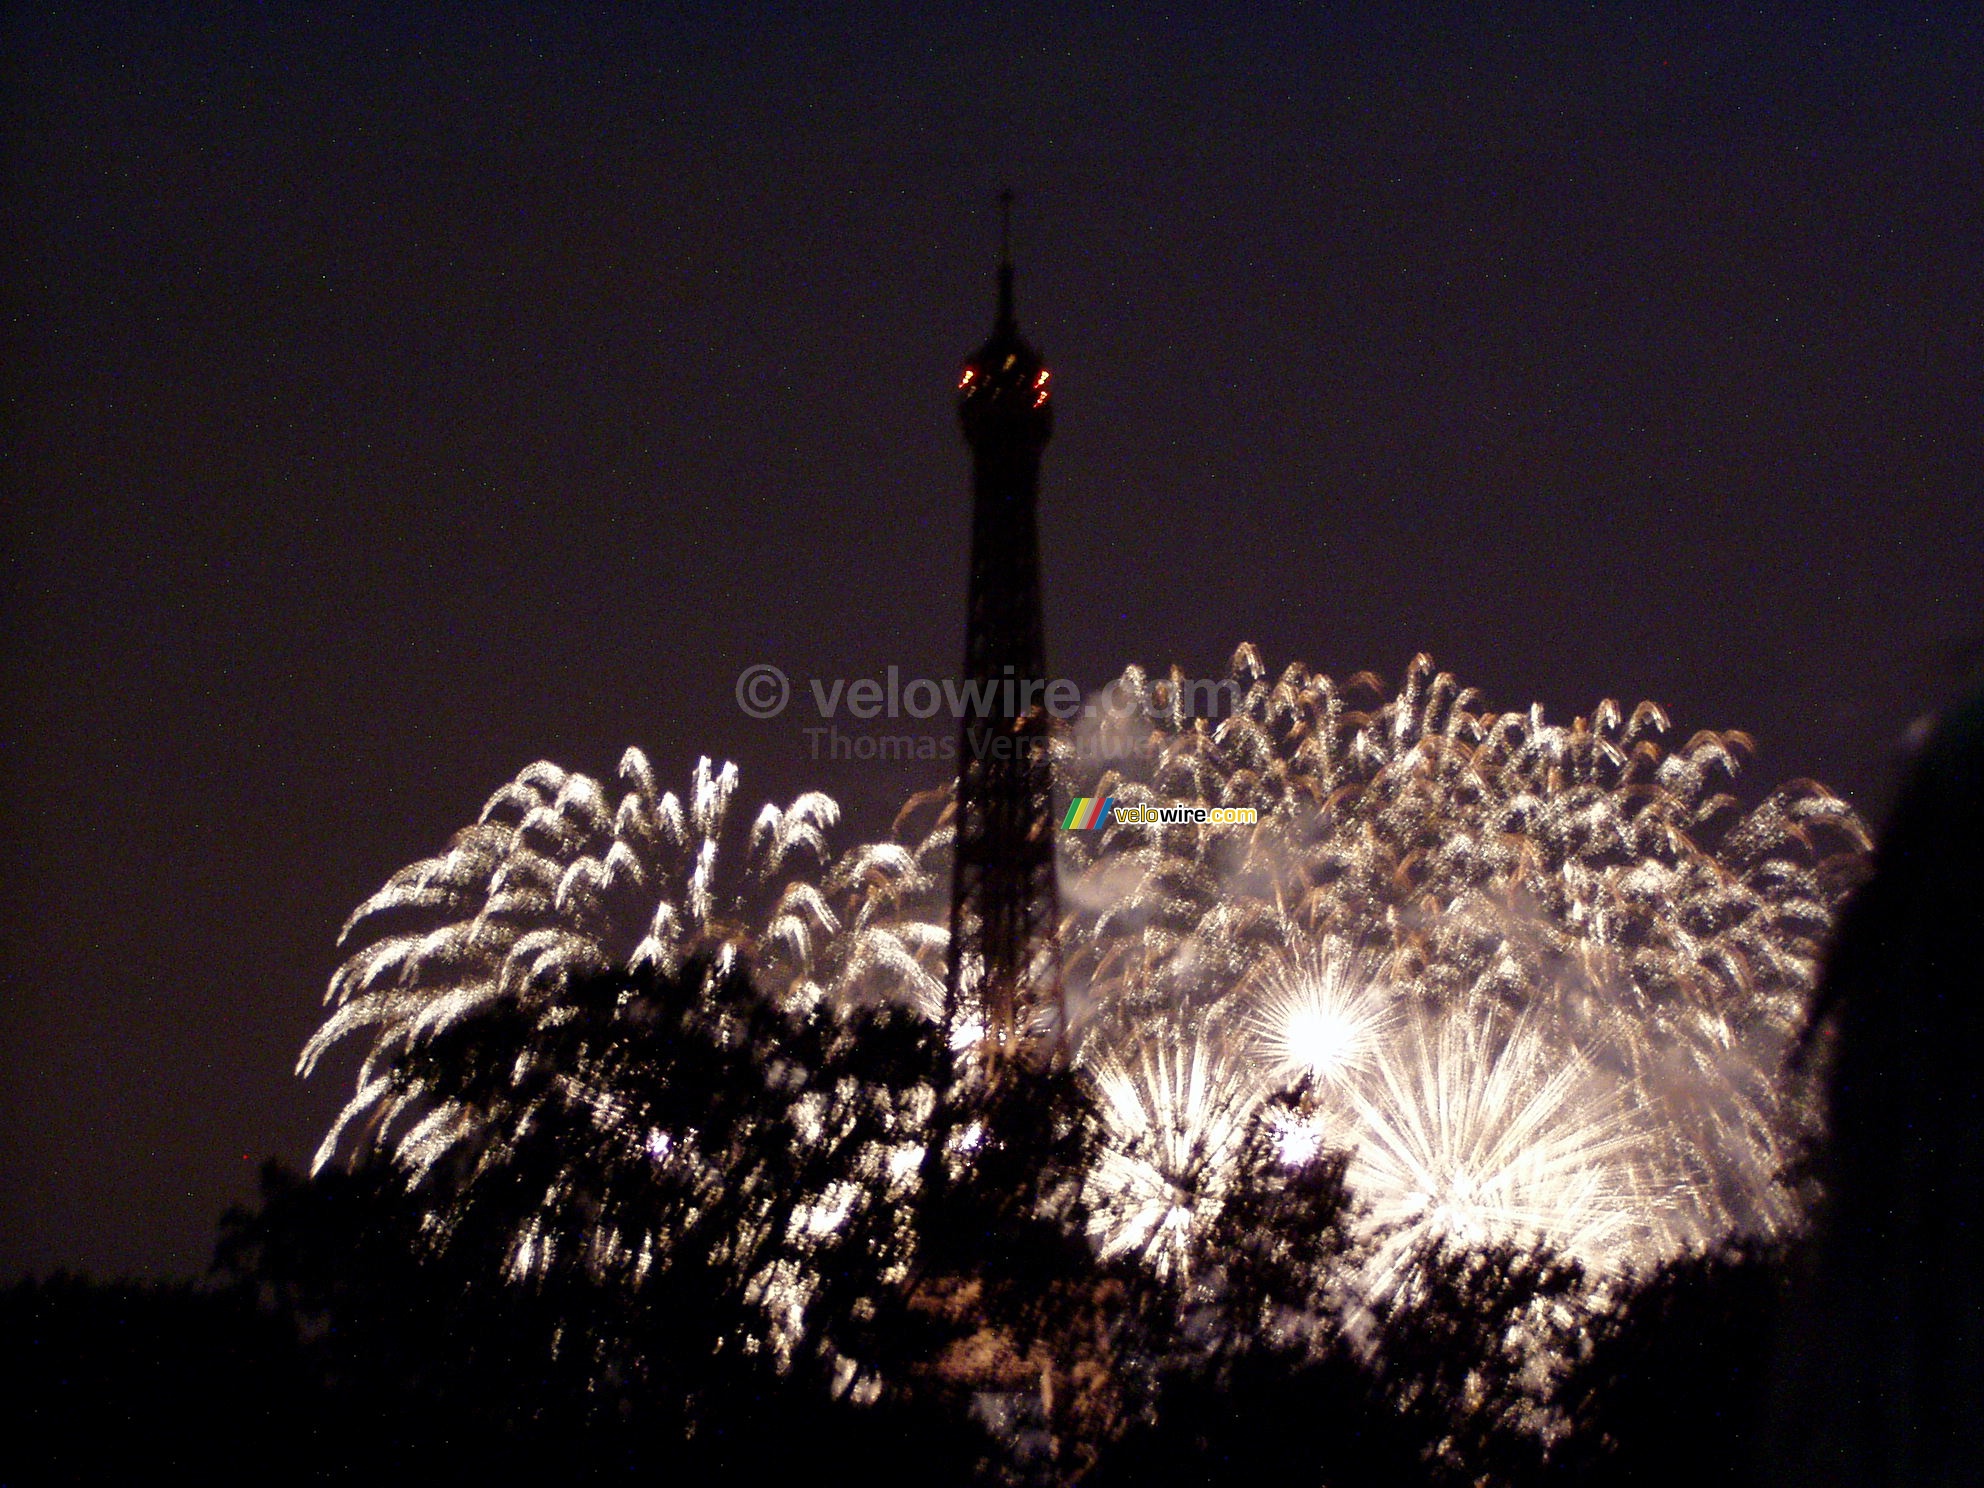 The Eiffel tower in the middle of the fireworks